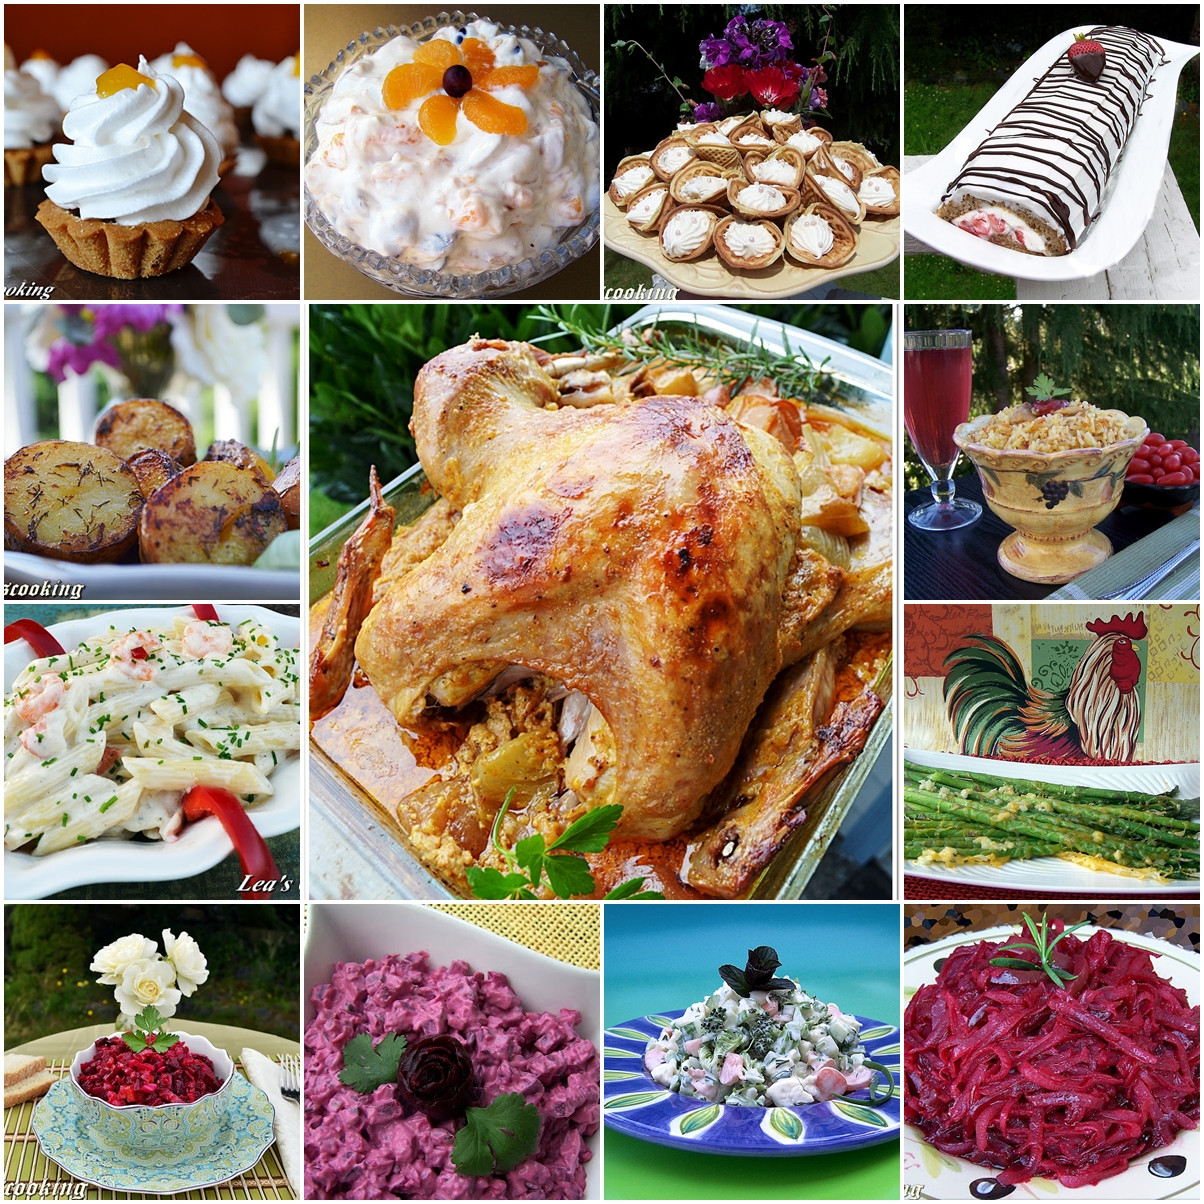 Dinner Party Dinner Ideas
 Lea s Cooking "Thanksgiving Dinner Party Ideas"